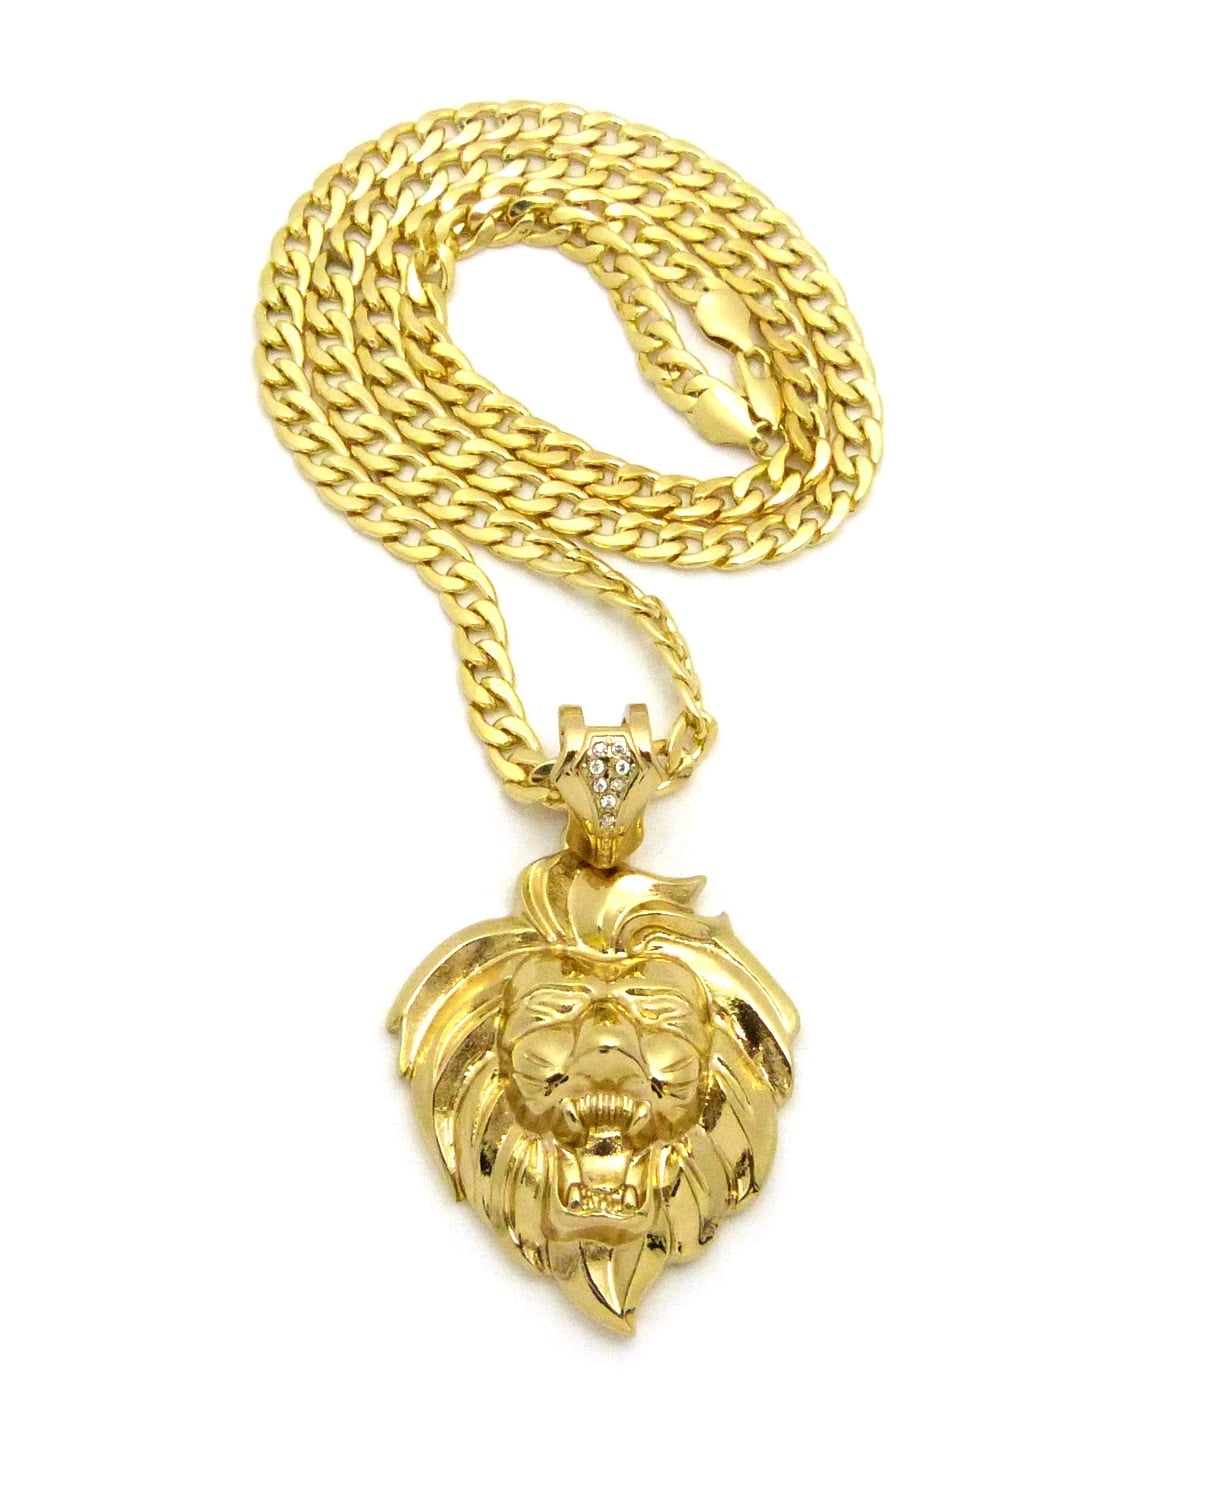 Travelwant Men's Chunky Rapper Necklace